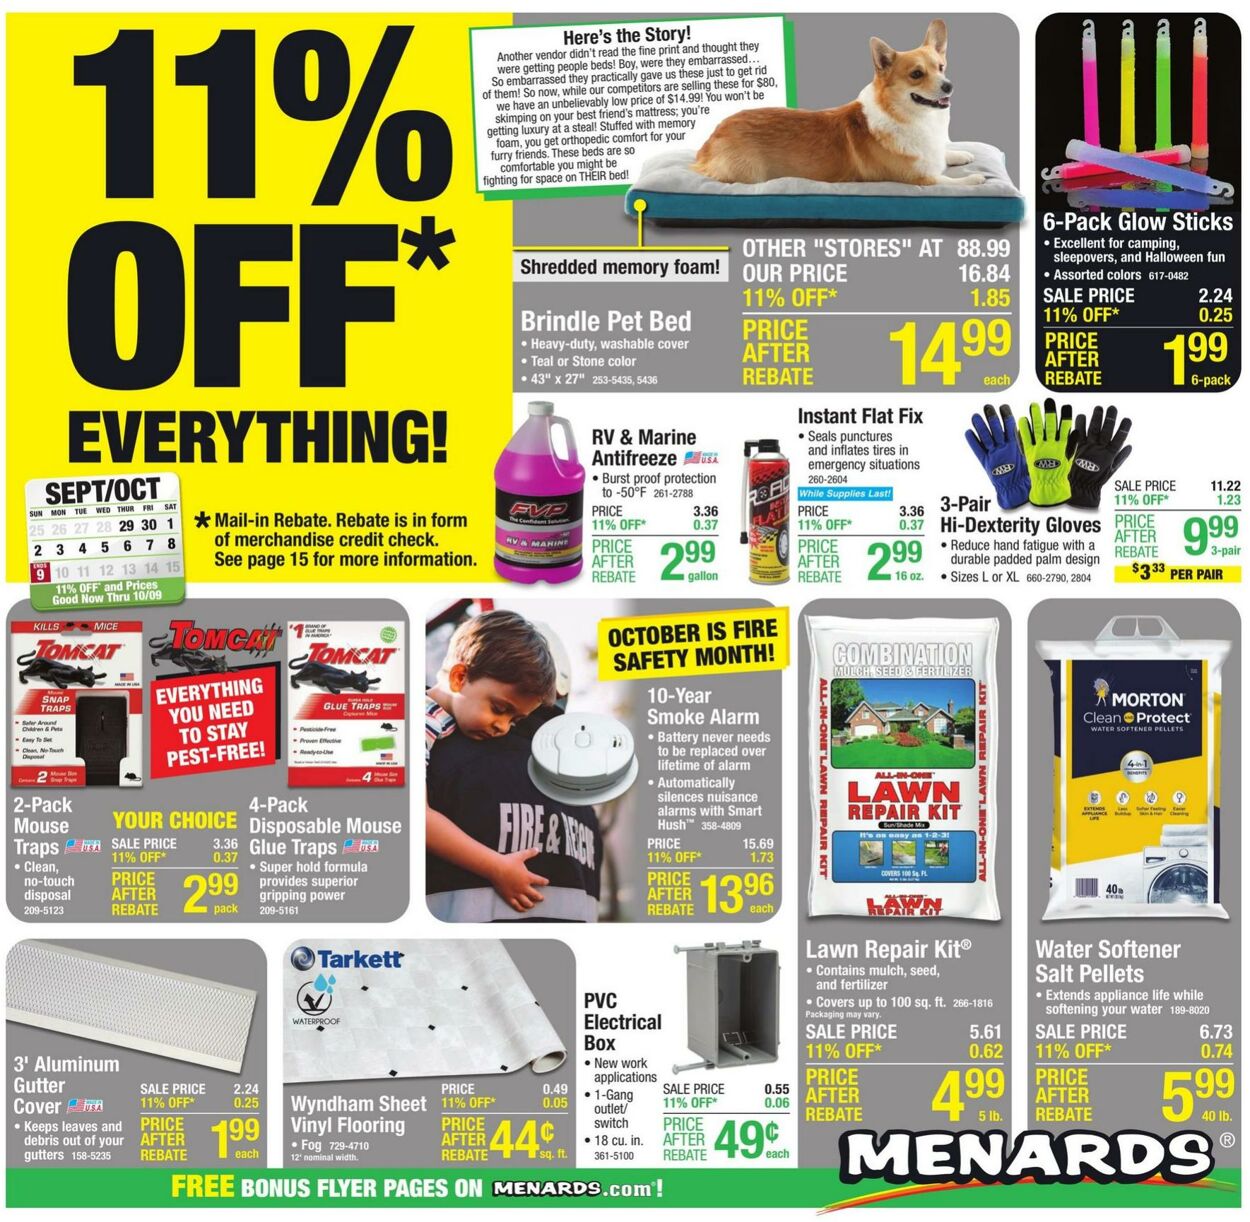 Menards Promotional weekly ads